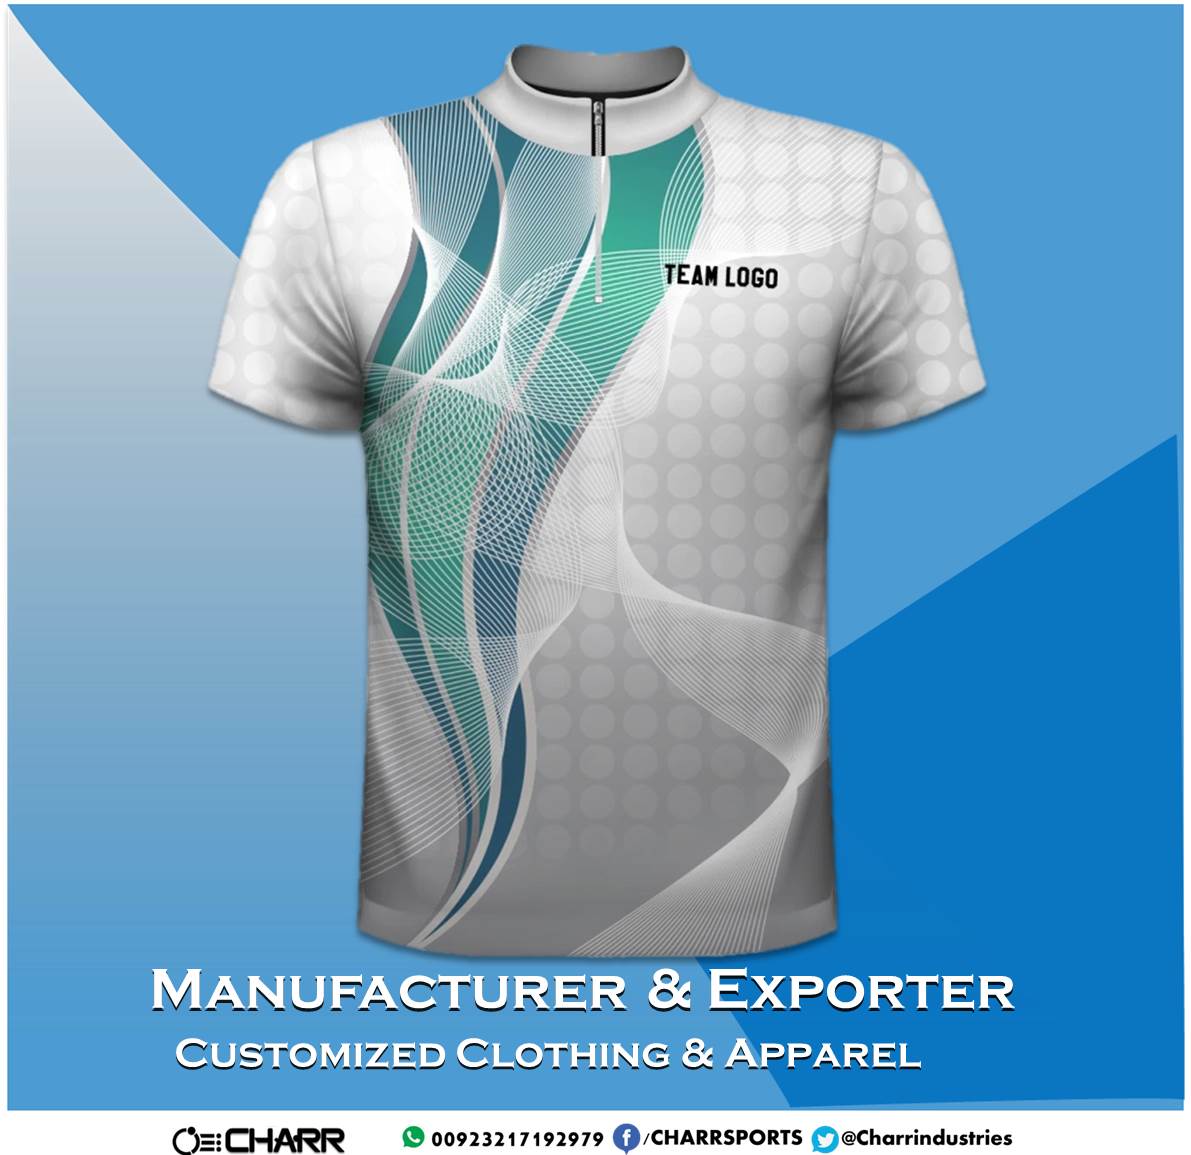 E-sports #TeamJersey #Charr #manufacturing #sportshirt #clothing #innovate #clothing #fashion #trends. +92 321 7192979 #workout #leggings #UK #fitting #US #fitness #yoga #gym #running #Canada #outfits #followme #hot #activewear #exercise #sports #gymwear #training #women #cycling